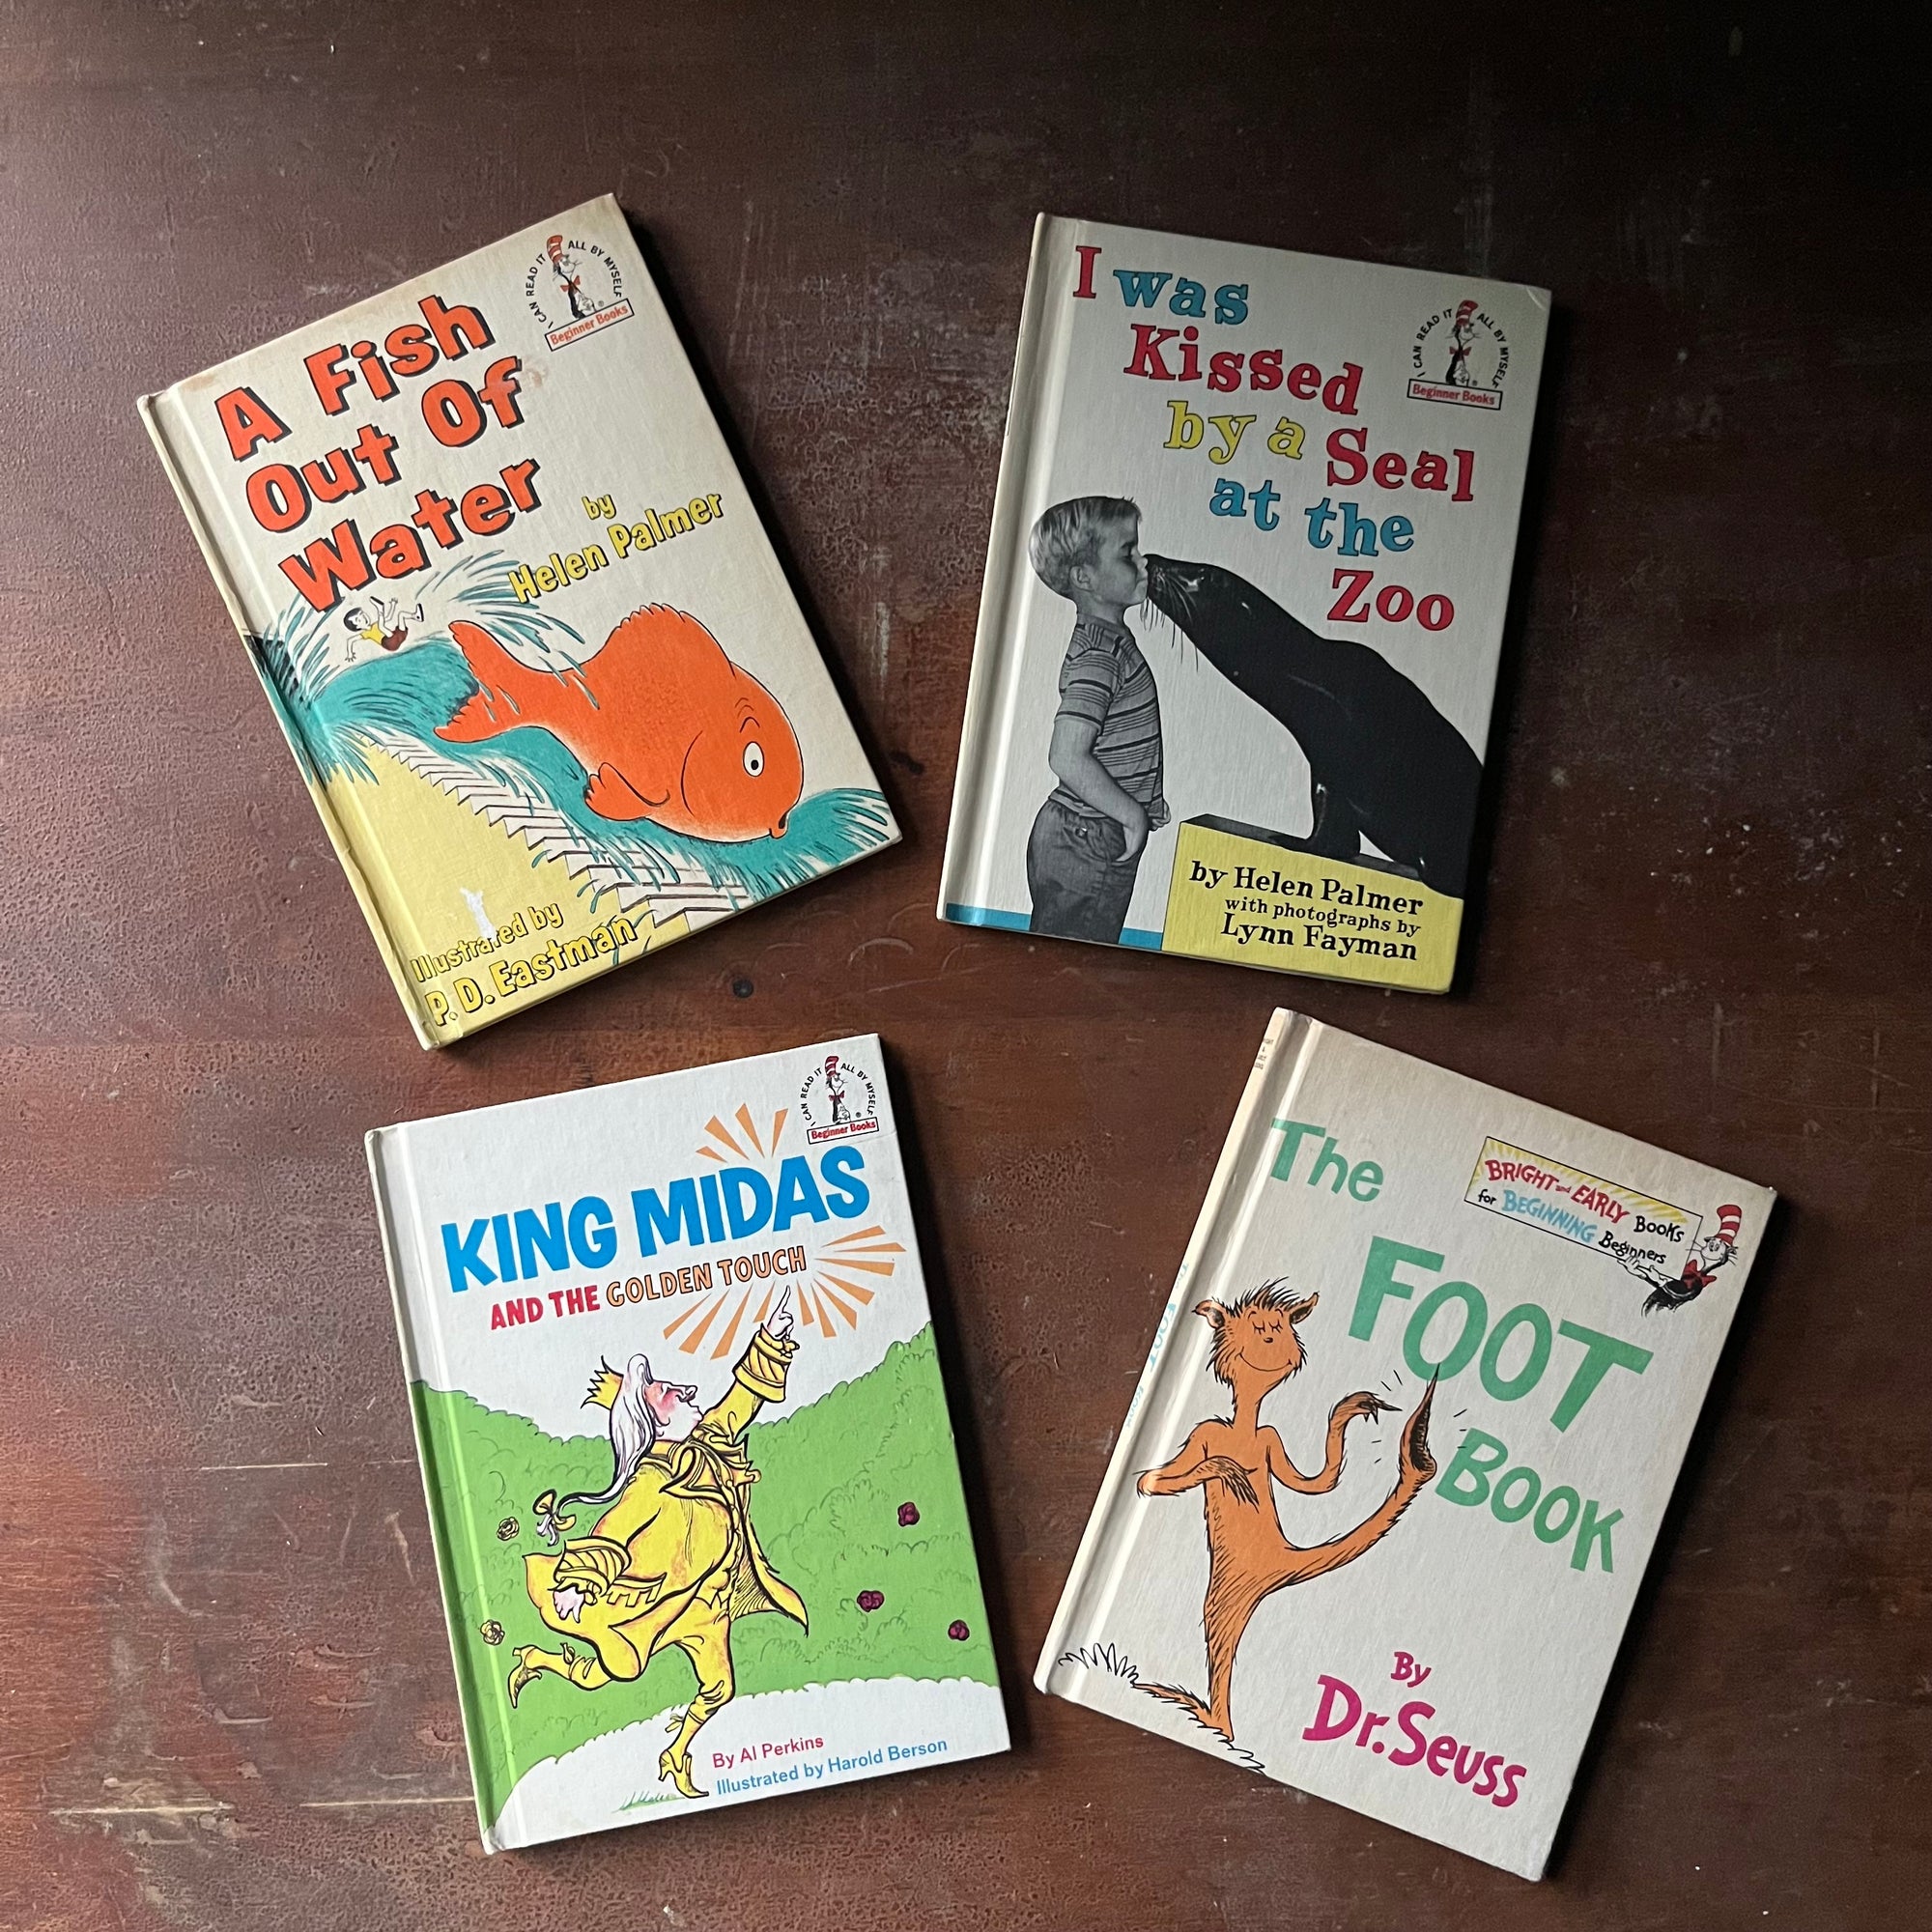 vintage picture books - I Can Read it All By Myself Beginner Book 4 Book Set:  A Fish Out of Water, I Was Kissed by a Seal at the Zoo, King Midas and the Golden Touch, and The Foot Book written by Dr. Suess, Helen Palmer, & Al Perkins - view of the front covers